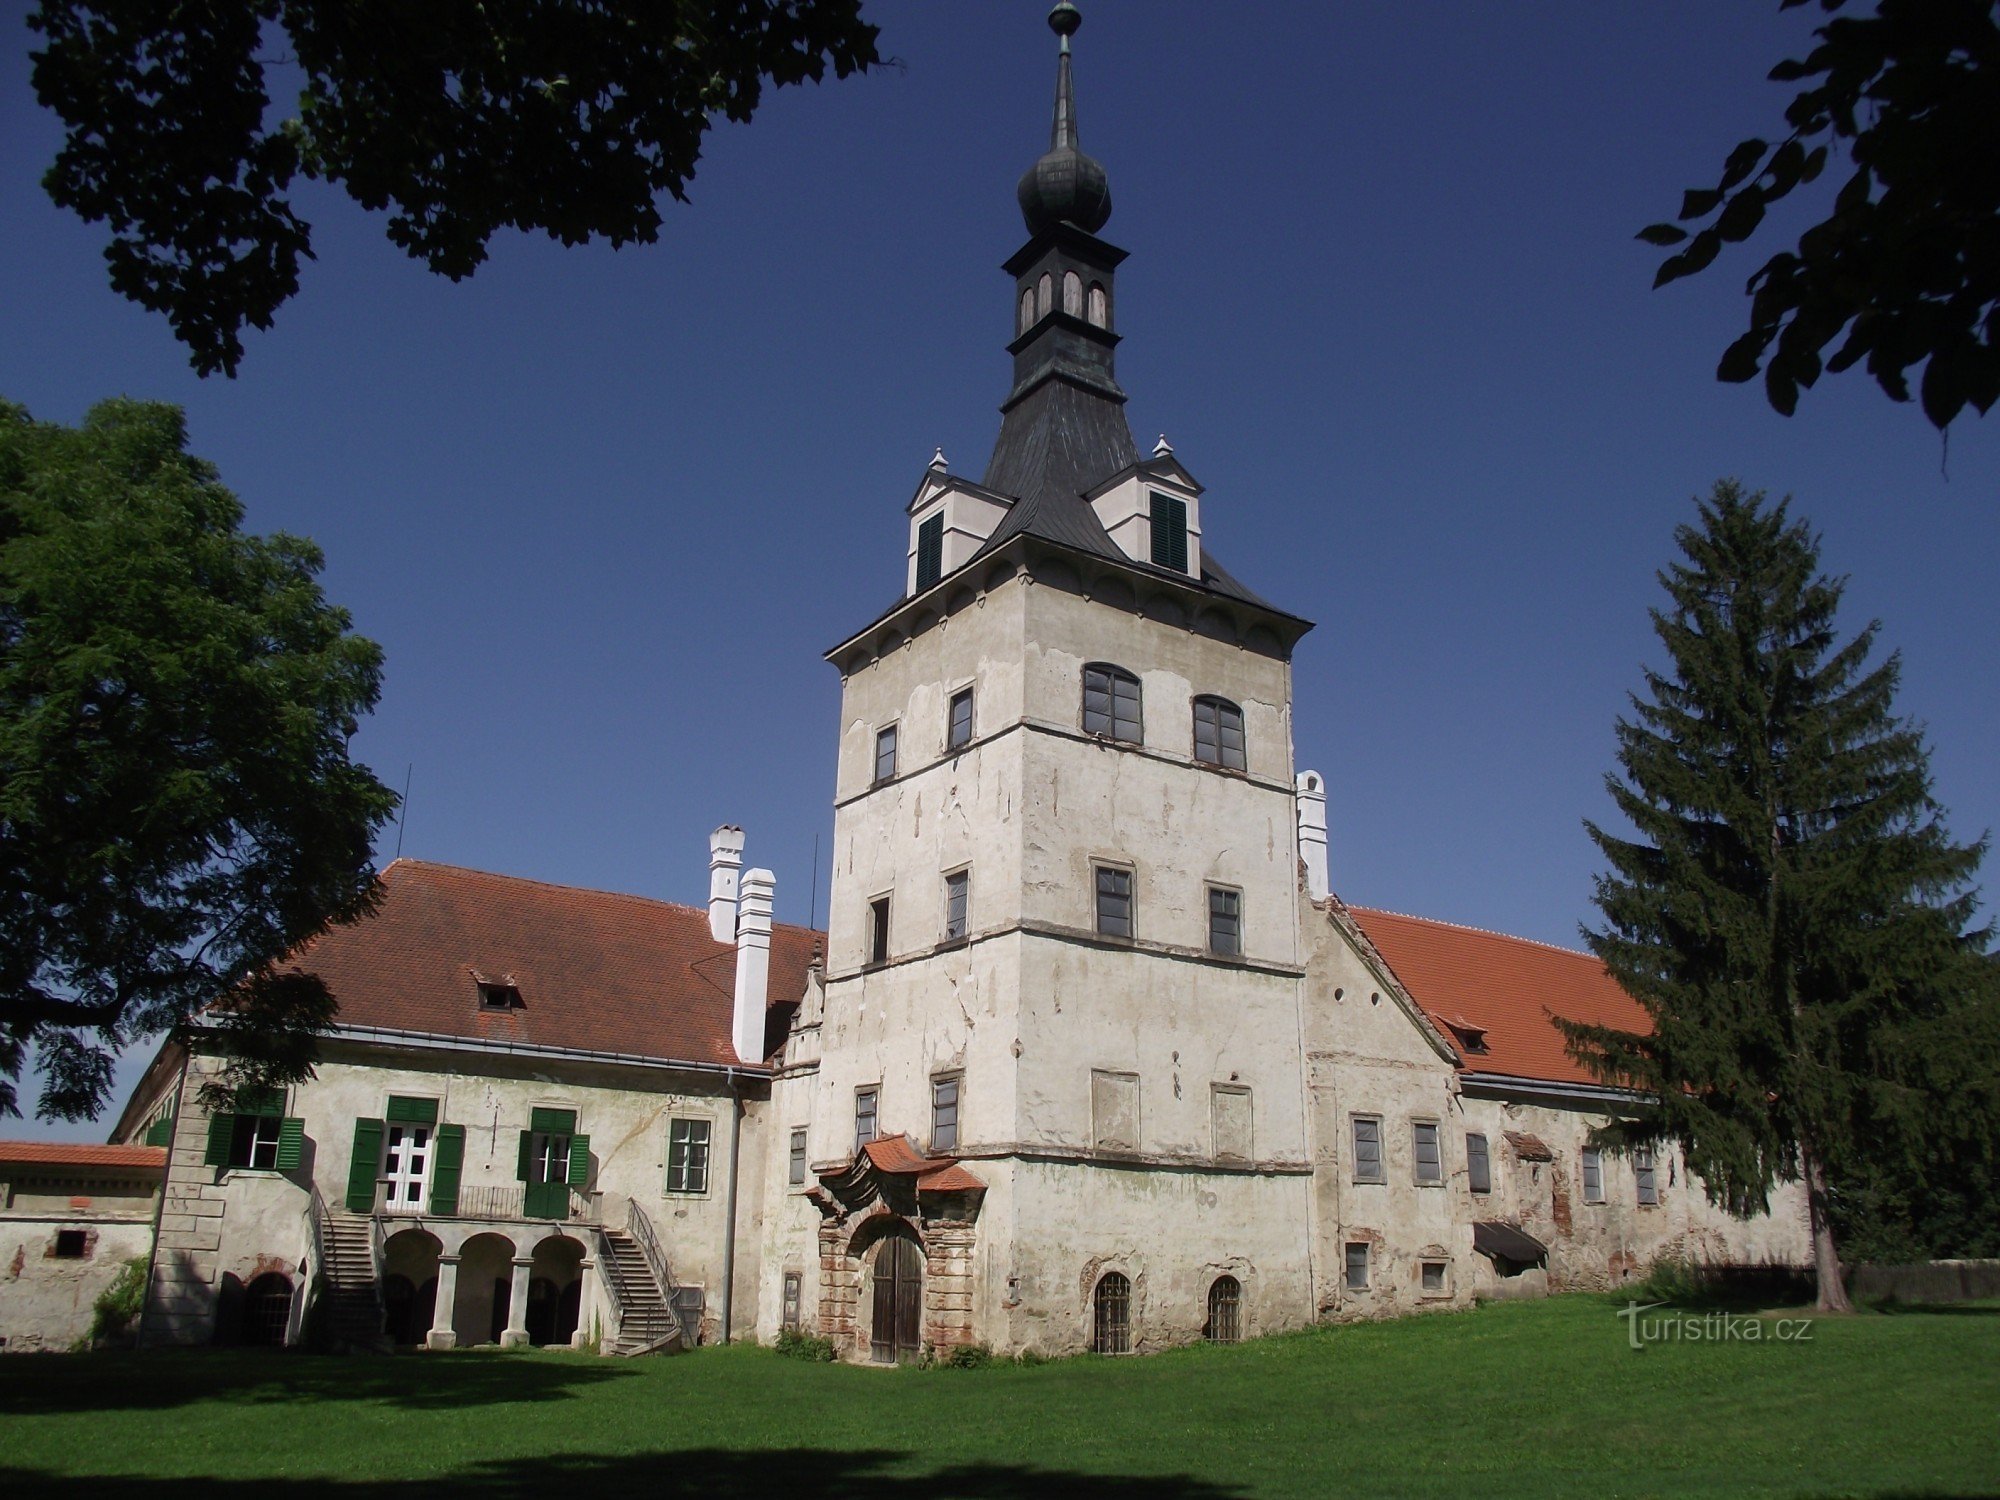 eastern facade with a Renaissance tower